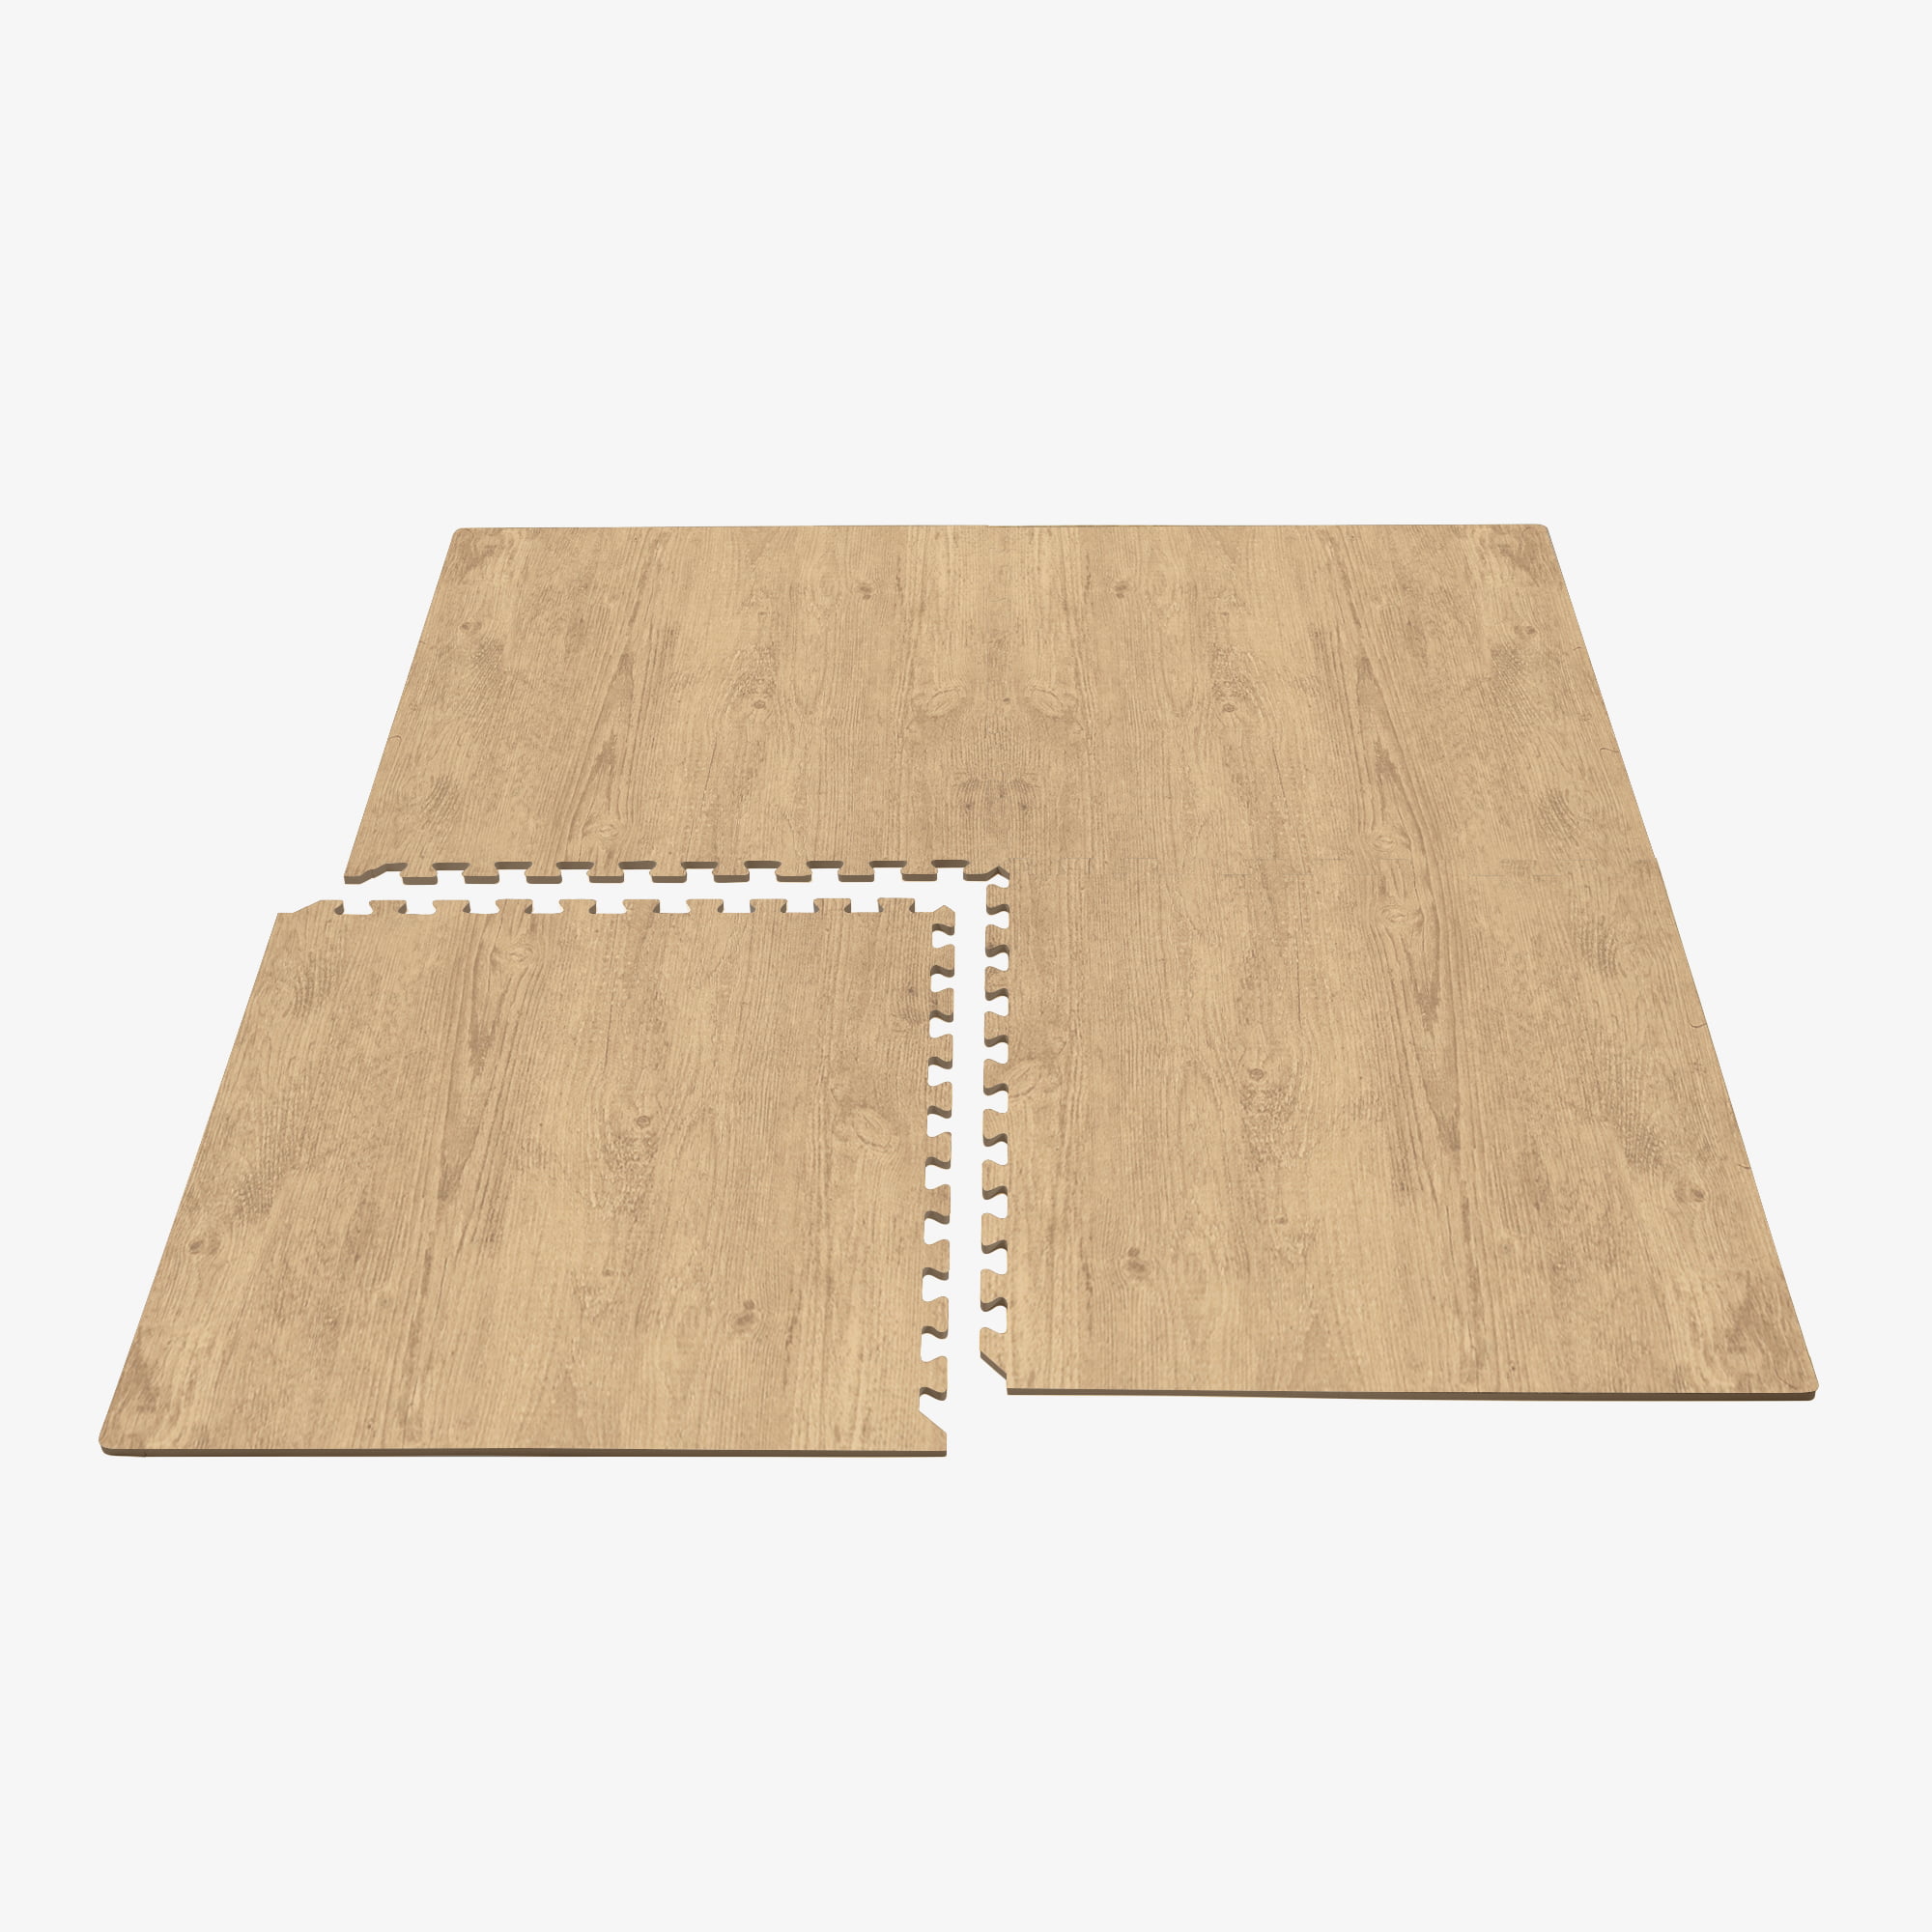 Softwoods Anti-Fatigue Mat 3' x 5' (1/2 and 7/8 Thickness) - 1/2 | Elite Garage Floors